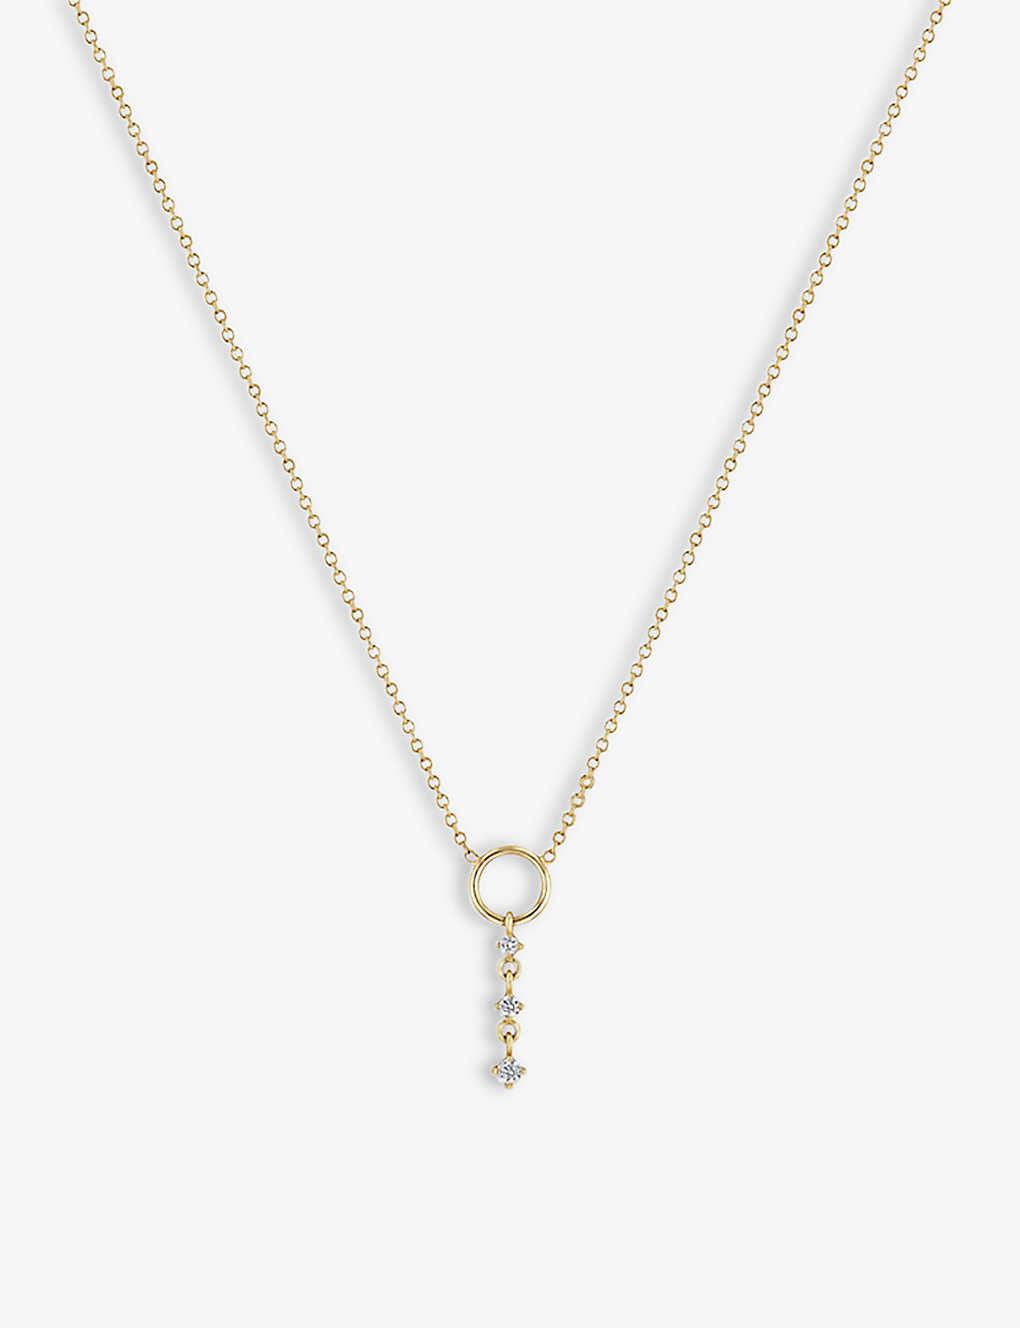 The Alkemistry Women's Yellow Gold Zoë Chicco 14ct Yellow-gold And 0.07ct Diamond Pendant Necklace